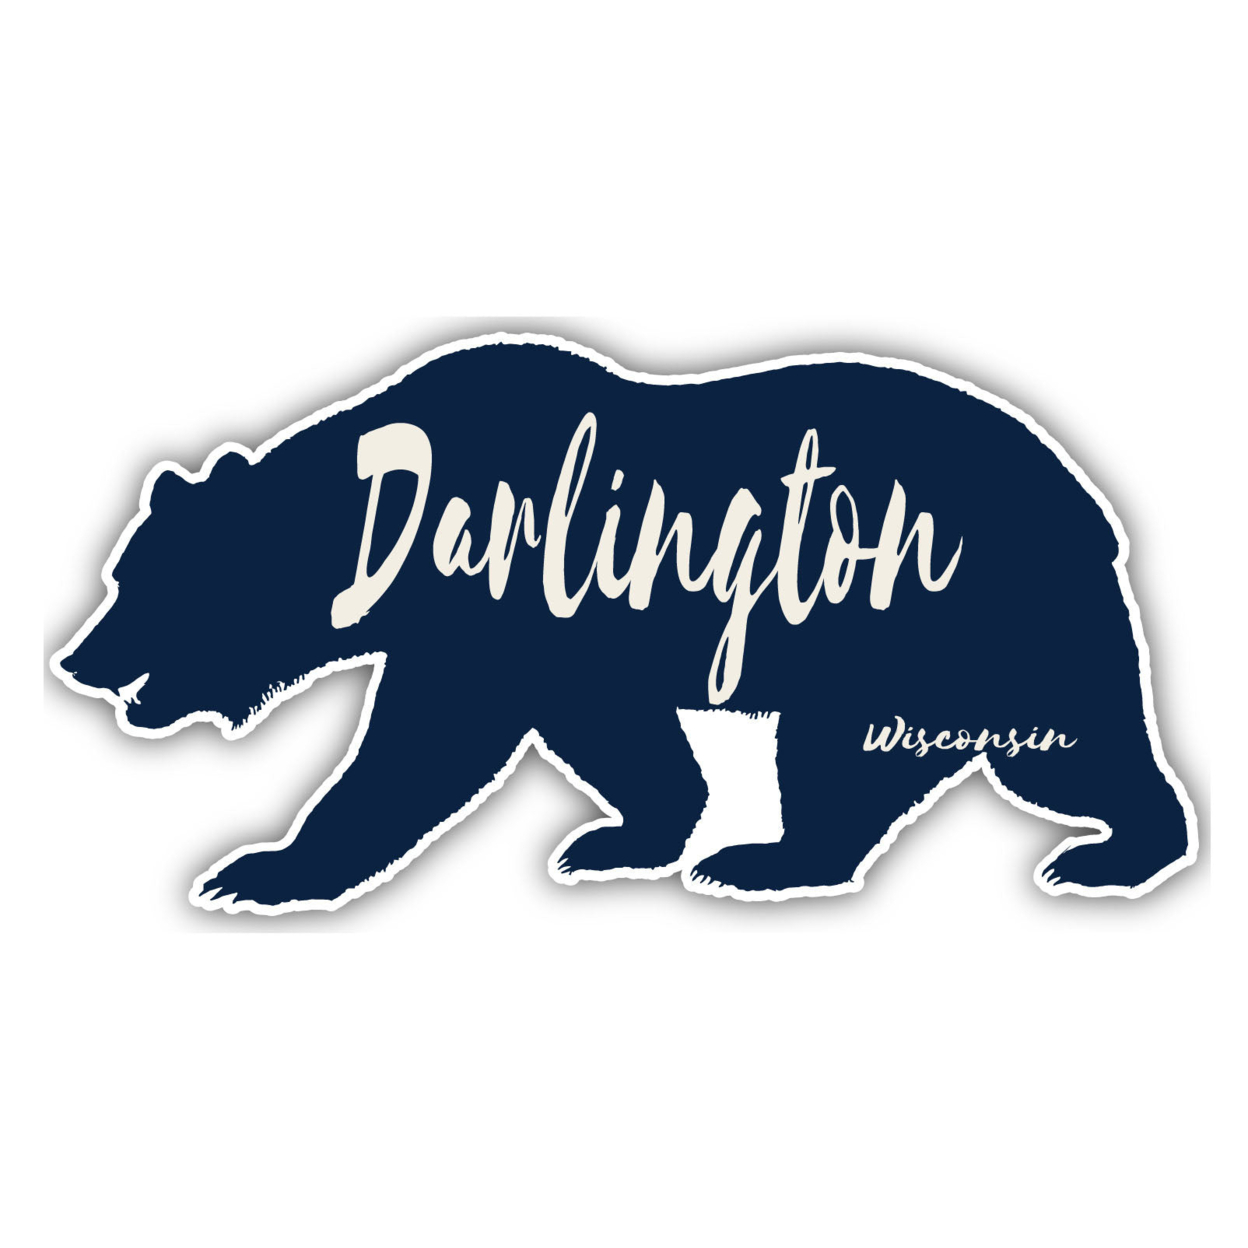 Darlington Wisconsin Souvenir Decorative Stickers (Choose Theme And Size) - 4-Pack, 12-Inch, Bear